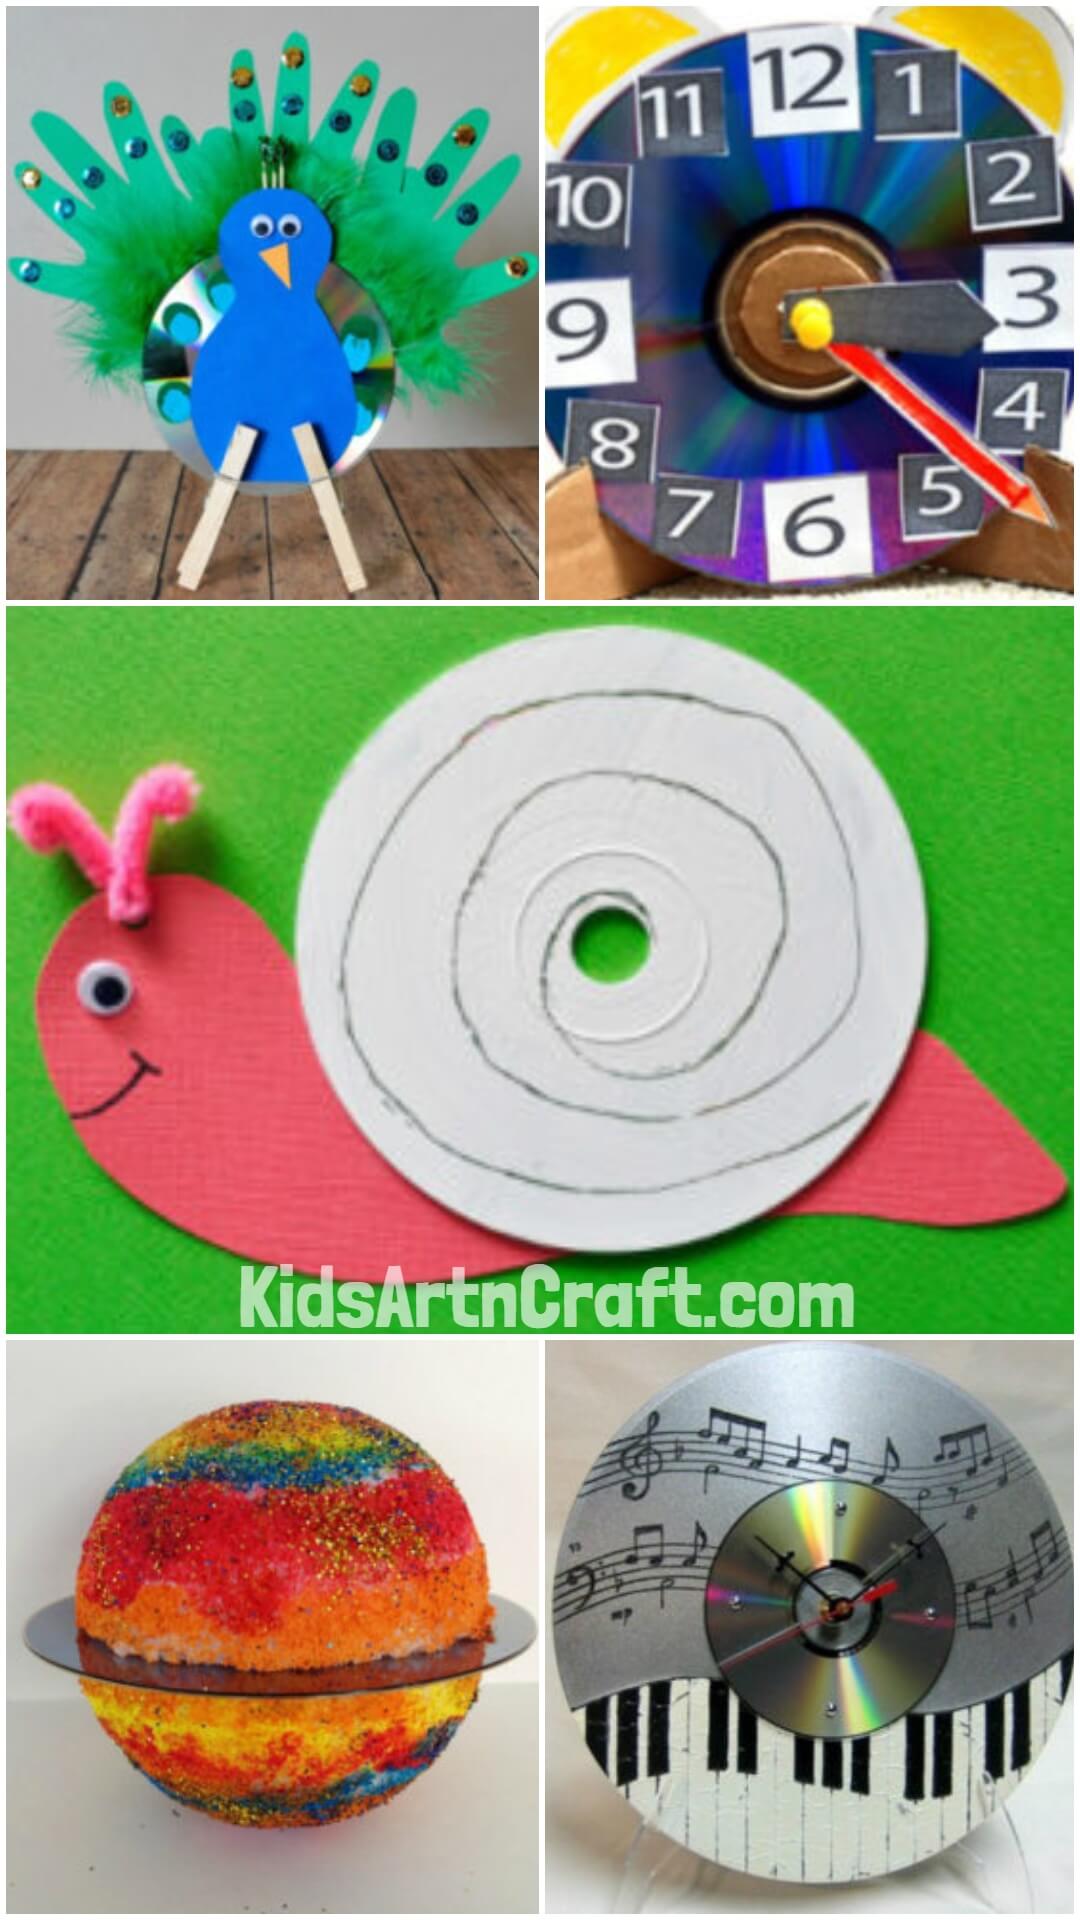 Brilliant DIY Ideas To Recycle Your Old CDs